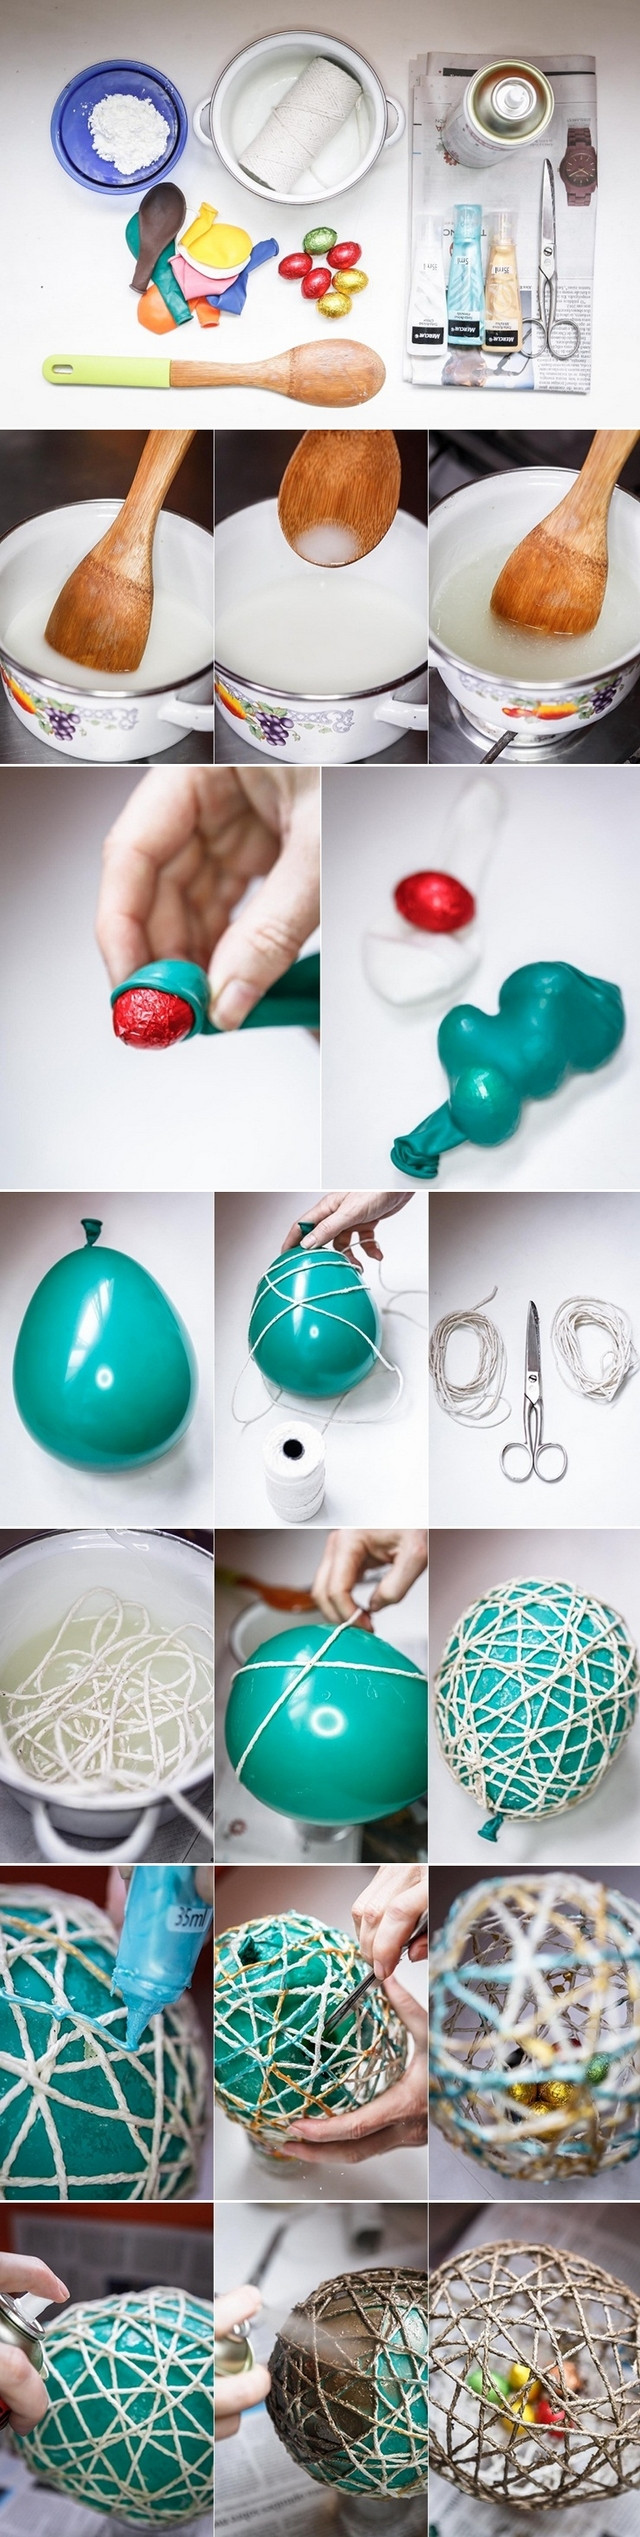 DIY Craft Projects For Adults
 Homemade Easter t ideas 4 Easy DIY projects for kids